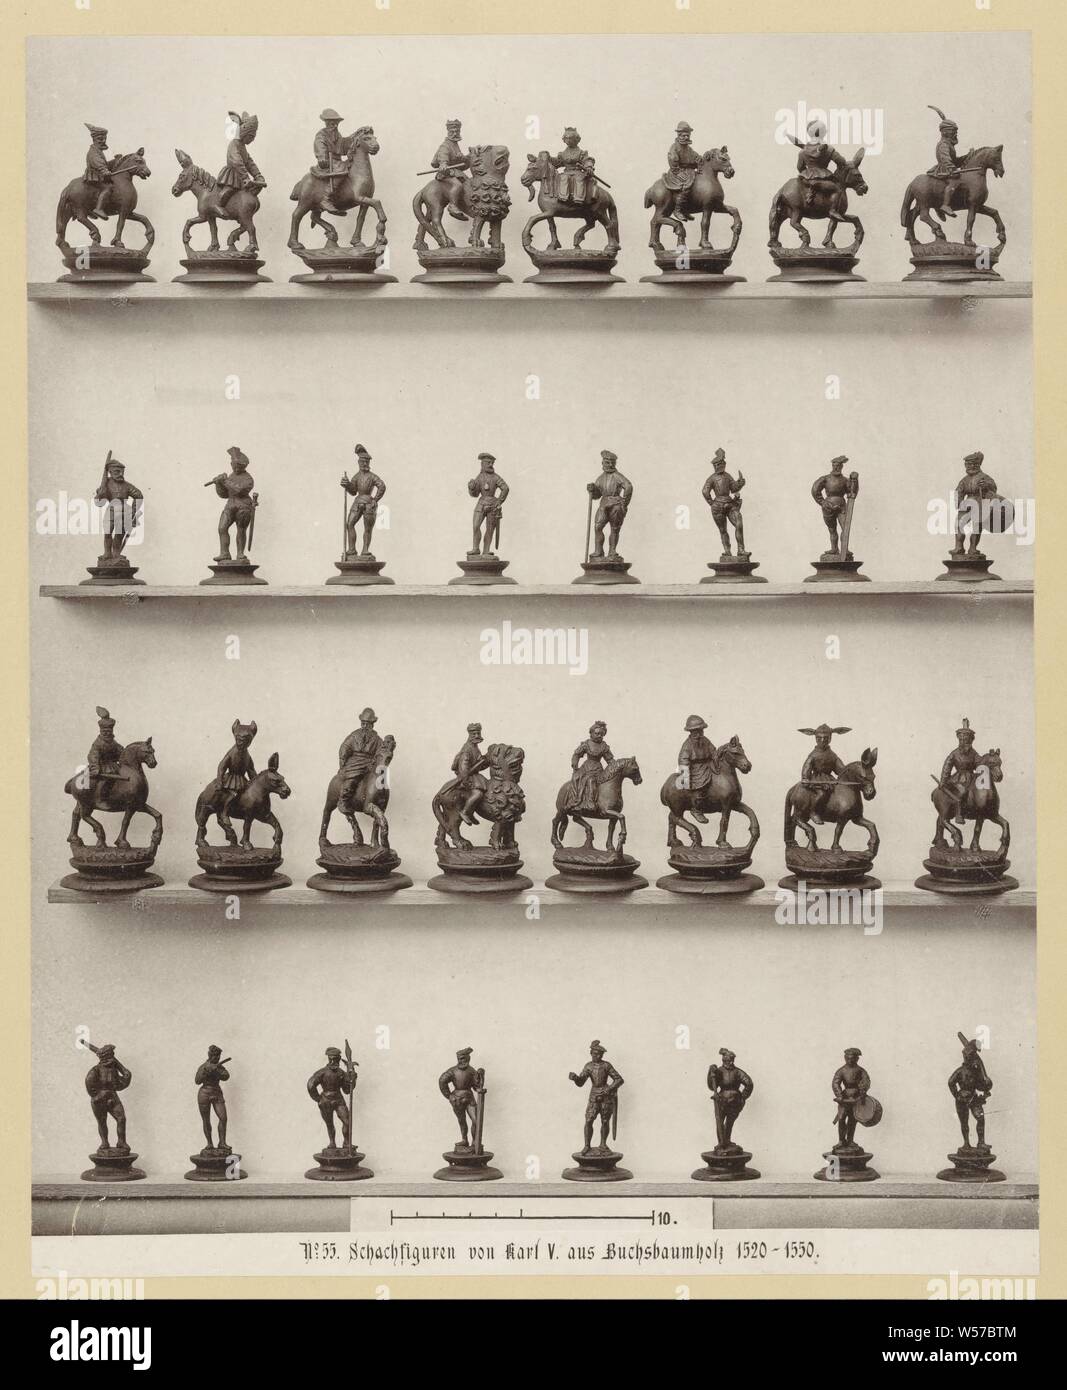 Chess pieces by Charles V from boxwood Schach figures by Karl V. aus Buchsbaumholz (title on object) 55 [/ Aus dem Bayerischen National Museum] (series title), Schachfiguren von Karl V. aus Buchsbaumholz 1520-1550, chessmen, work of applied art, Bayerisches National Museum (Munich), Charles V of Habsburg (German Emperor and King of Spain), Johann Baptist Obernetter (possibly), 1869 - 1887, paper, cardboard, collotype, h 272 mm × w 220 mm Stock Photo